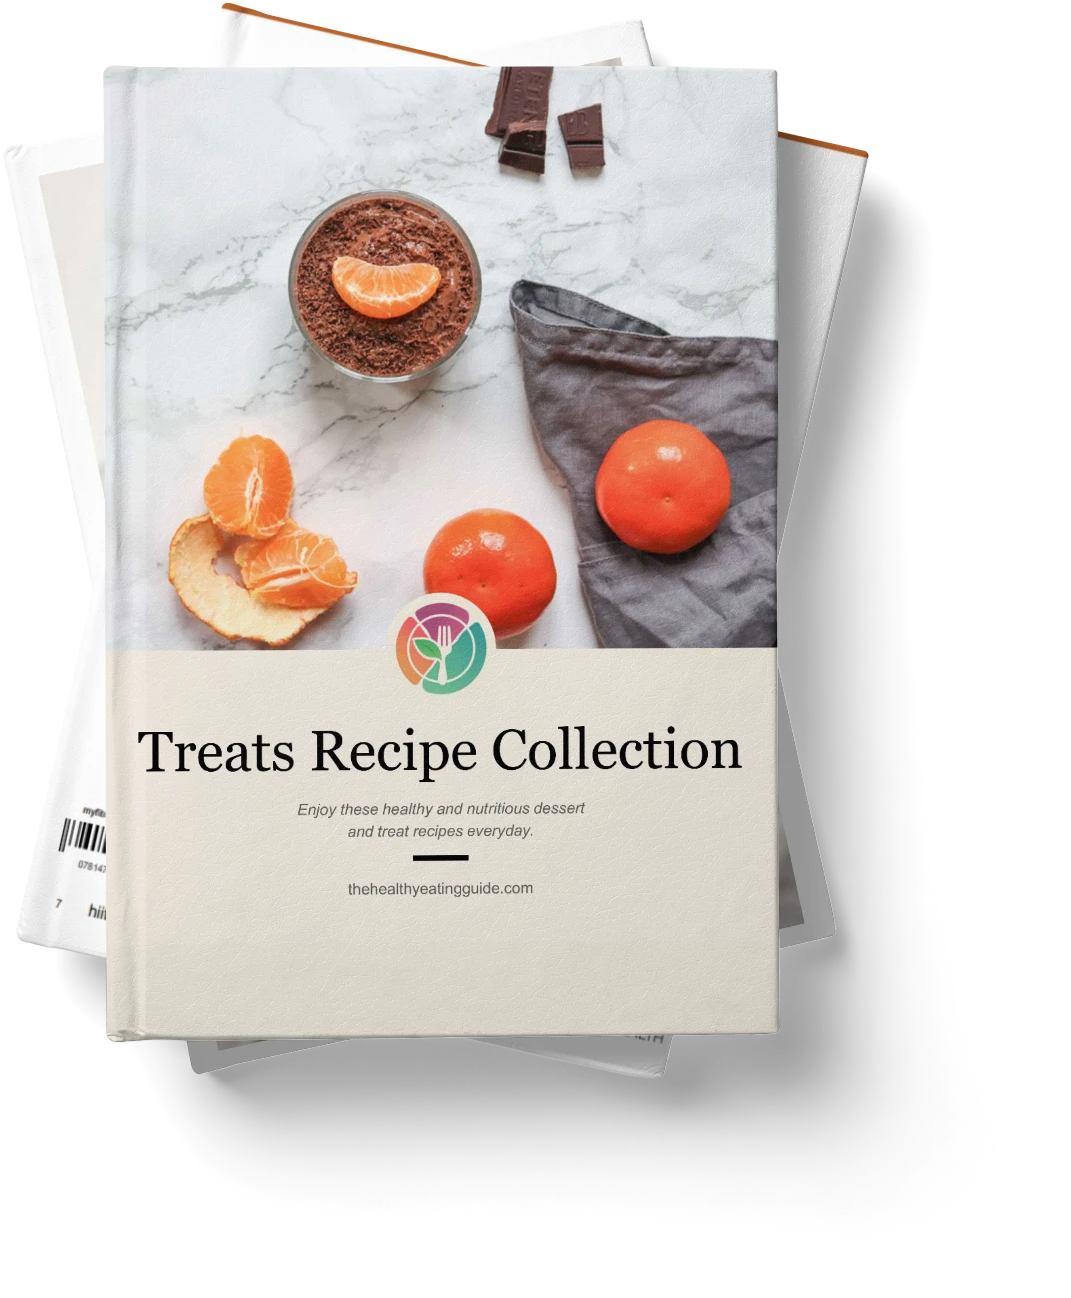 Treats Recipe Pack hard cover book stack